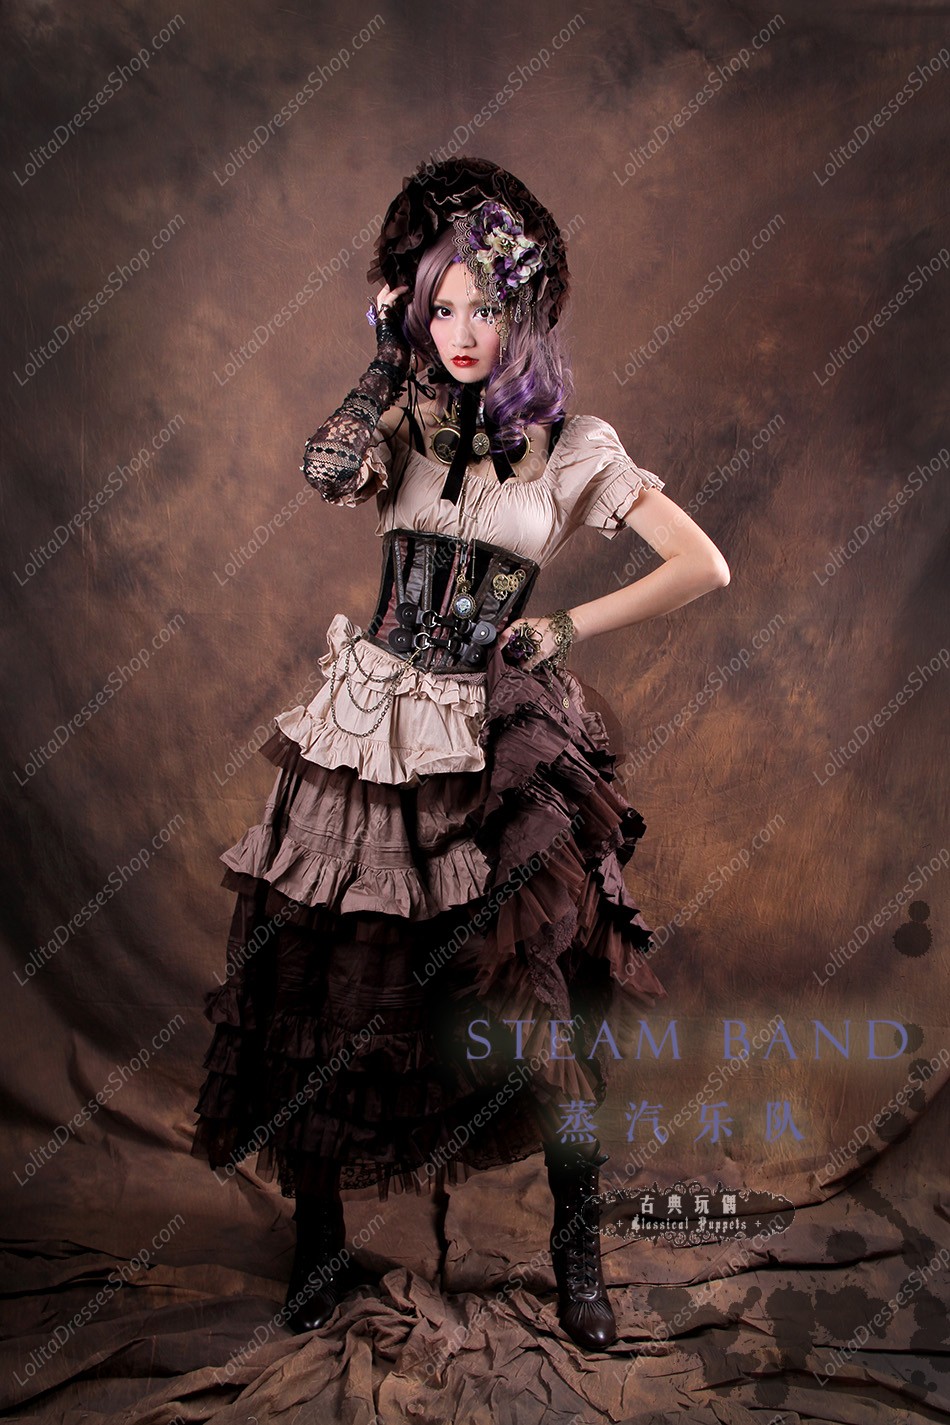 Sweet Steam Band Leather Fishbone Short Classical Puppets Lolita Girdles